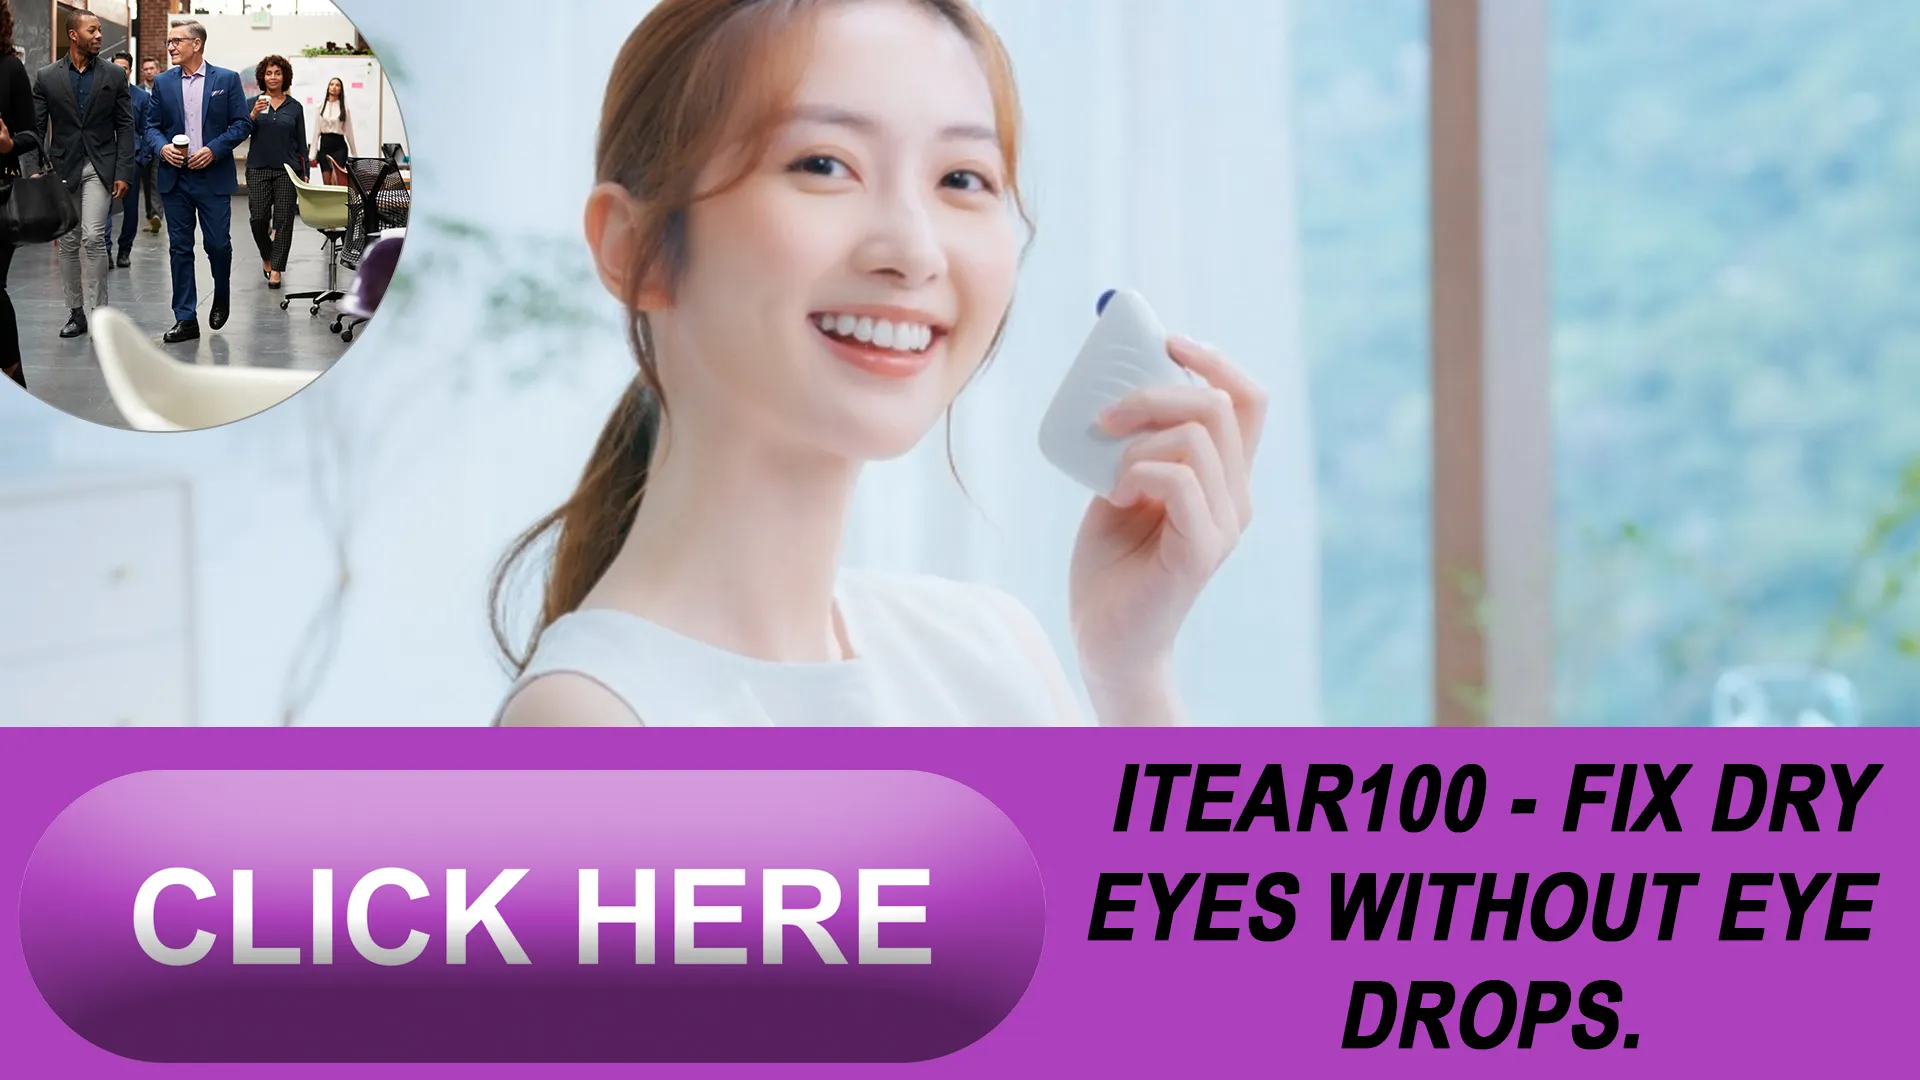 A Simple Path to Prescription: How to Get Your iTEAR100